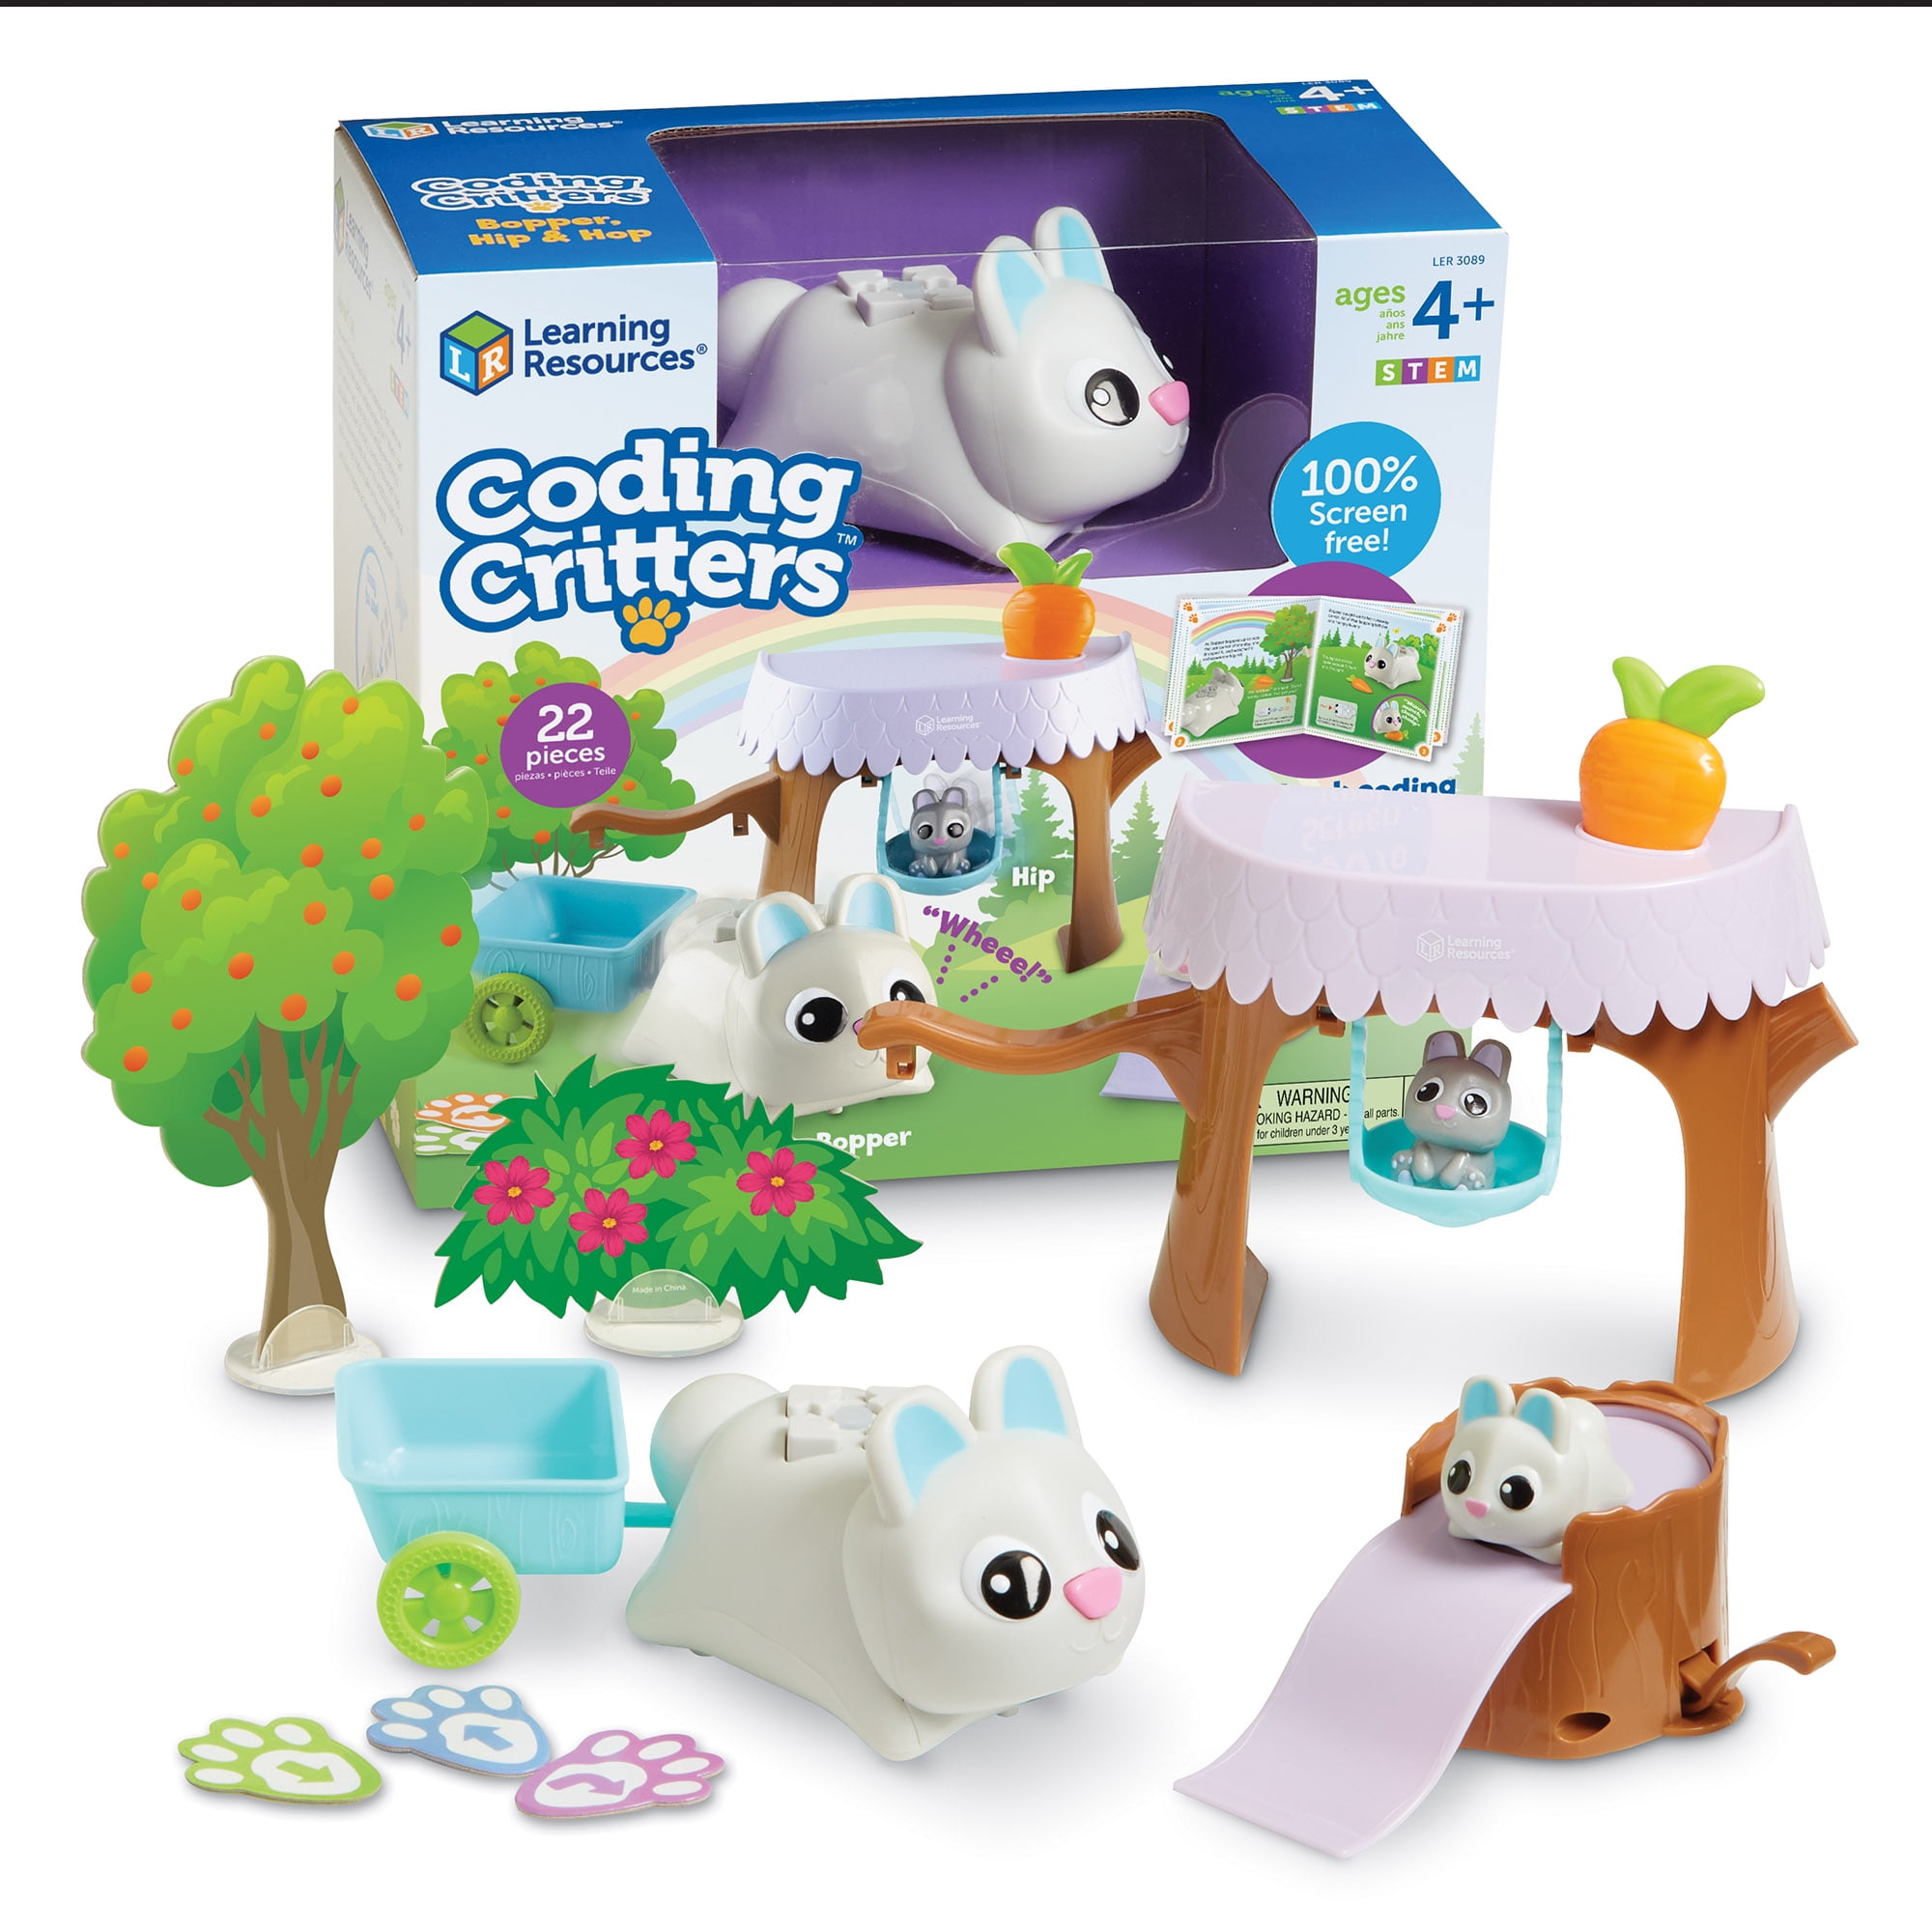 Matching & Sorting Toy 10 Counting Learning Resources Peekaboo Learning Farm 